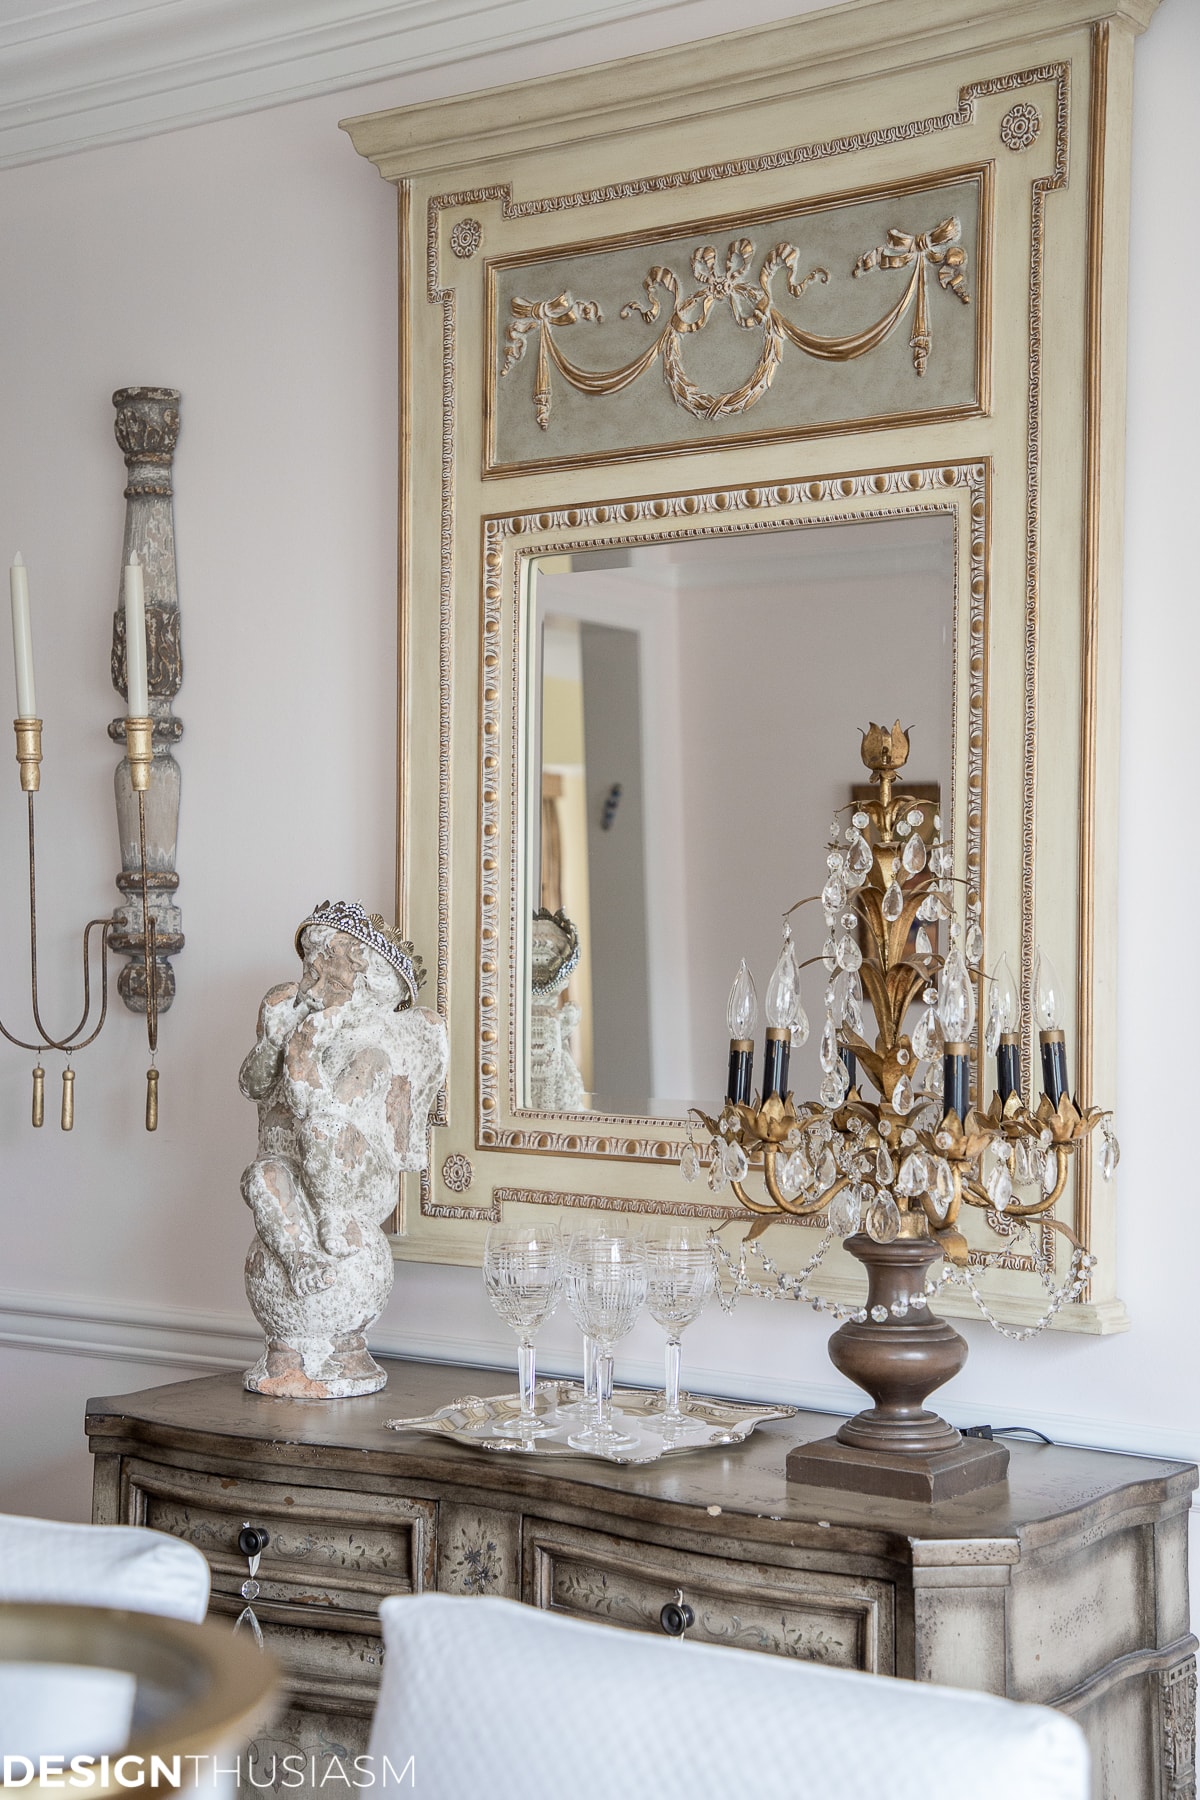 Decorative Mirrors for Above Fireplace Best Of Decorative Mirrors Adding French Country Charm with Gilded